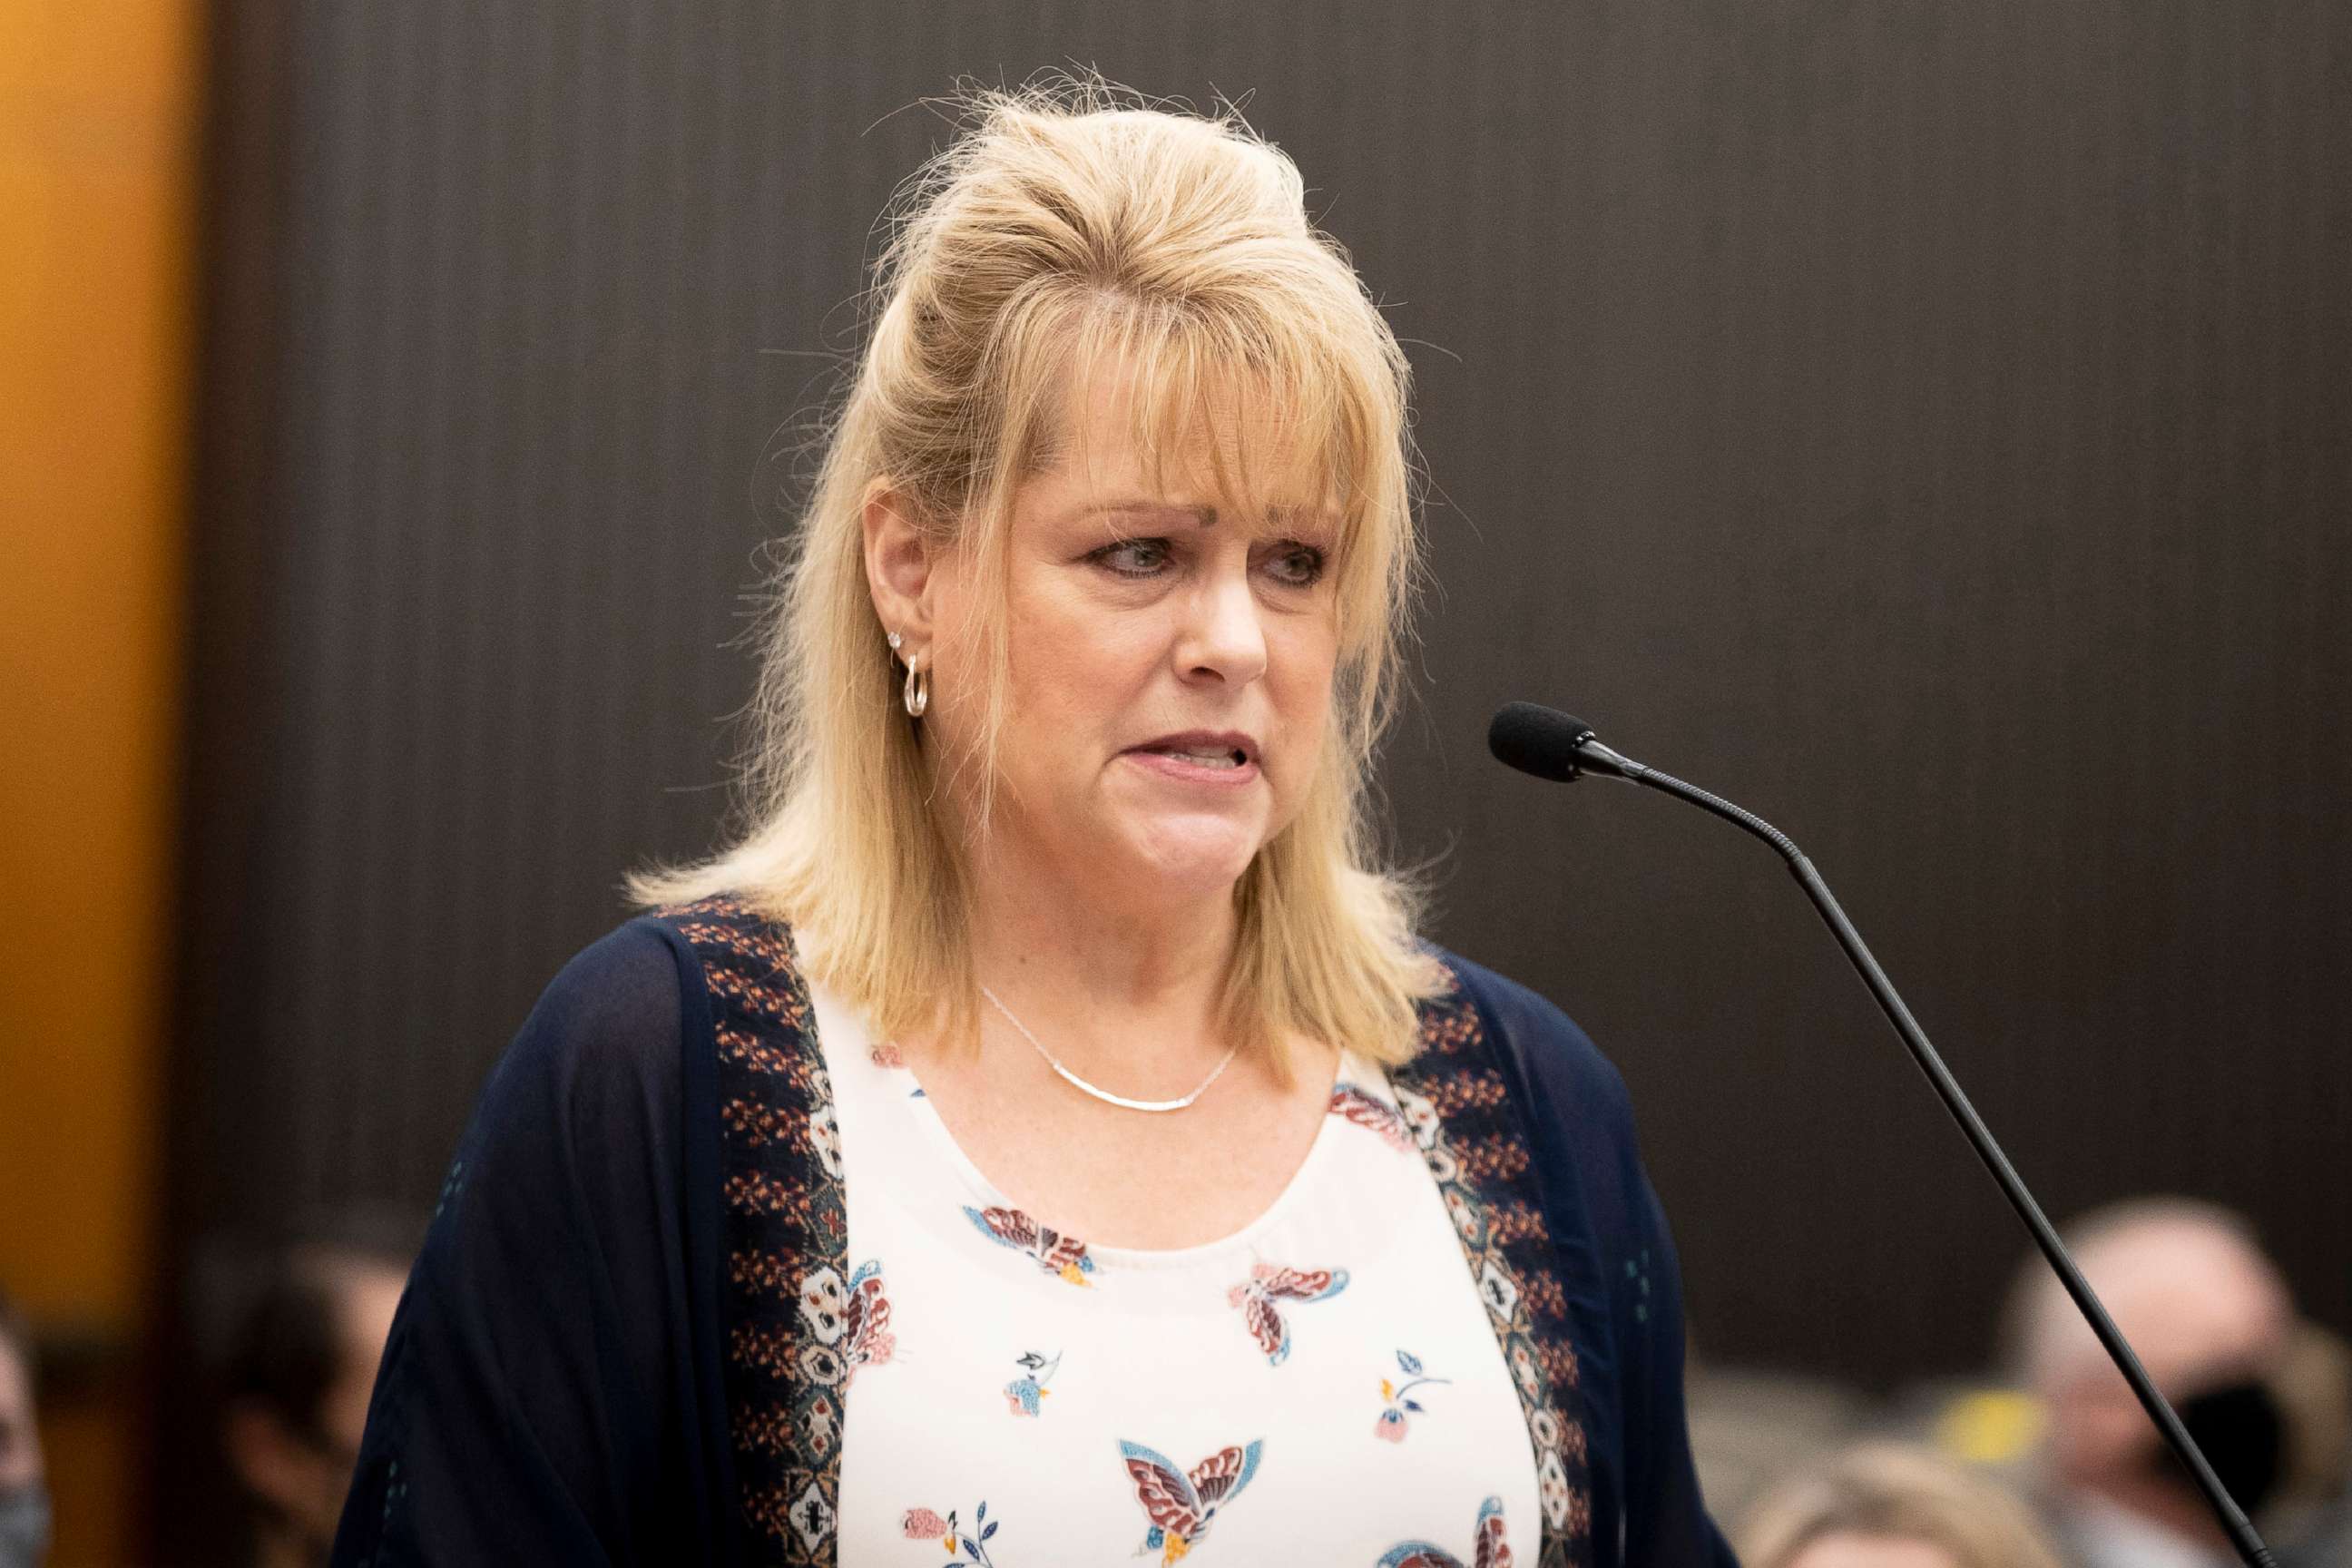 PHOTO: Elizabeth Hupp, daughter of Claude Snelling, makes a statement as Joseph James DeAngelo is in the courtroom during the third day of victim impact statements at the Gordon D. Schaber Sacramento County Courthouse, Aug. 20, 2020, in Sacramento, Calif.